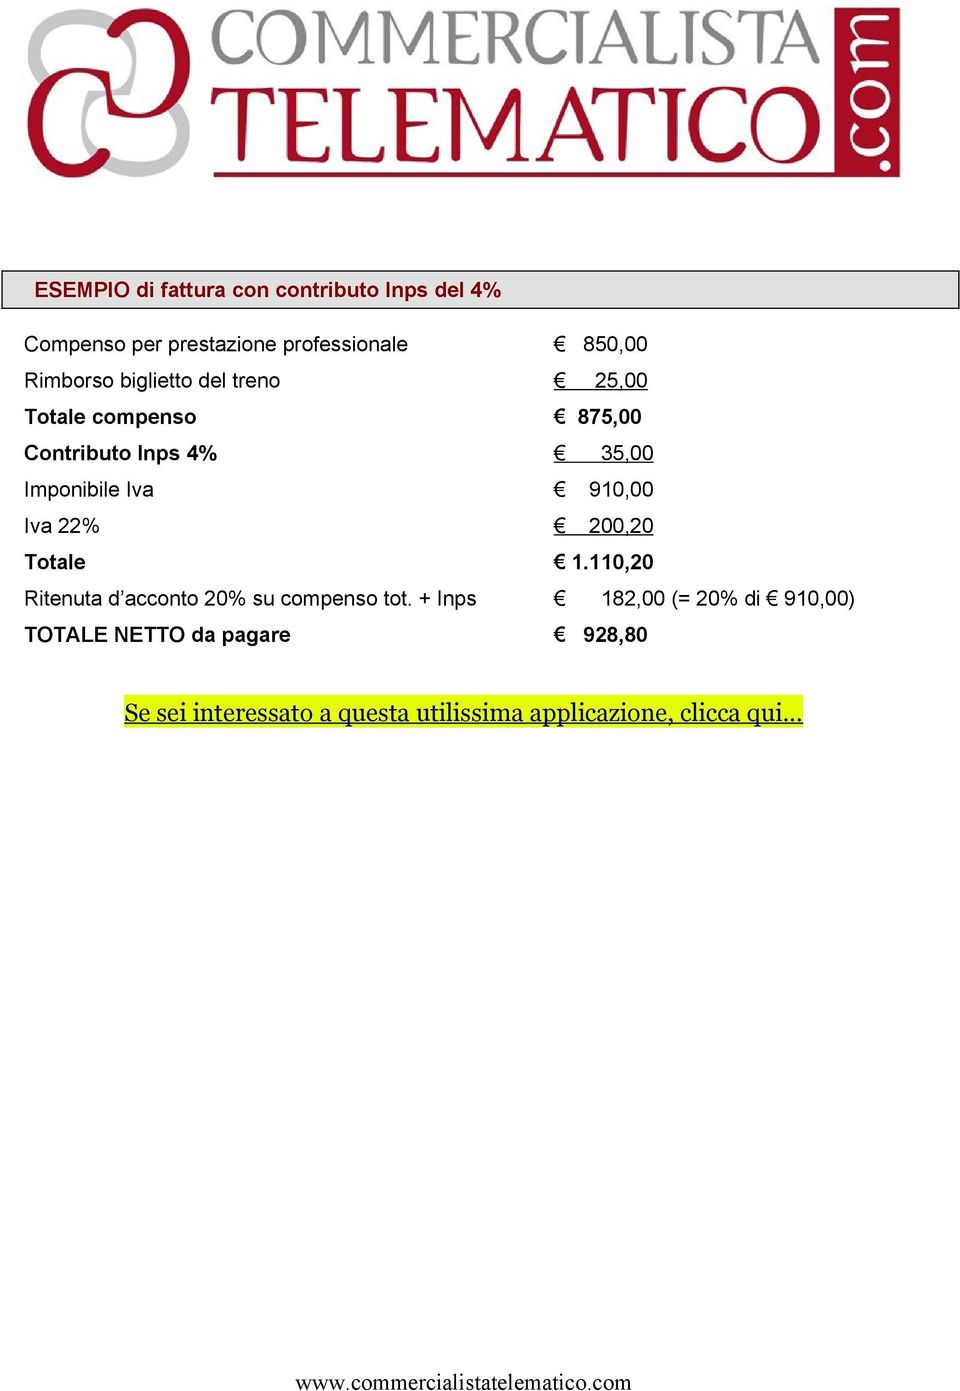 Contributo Inps 4% 35,00 Imponibile Iva 910,00 Iva 22% 200,20 Totale 1.